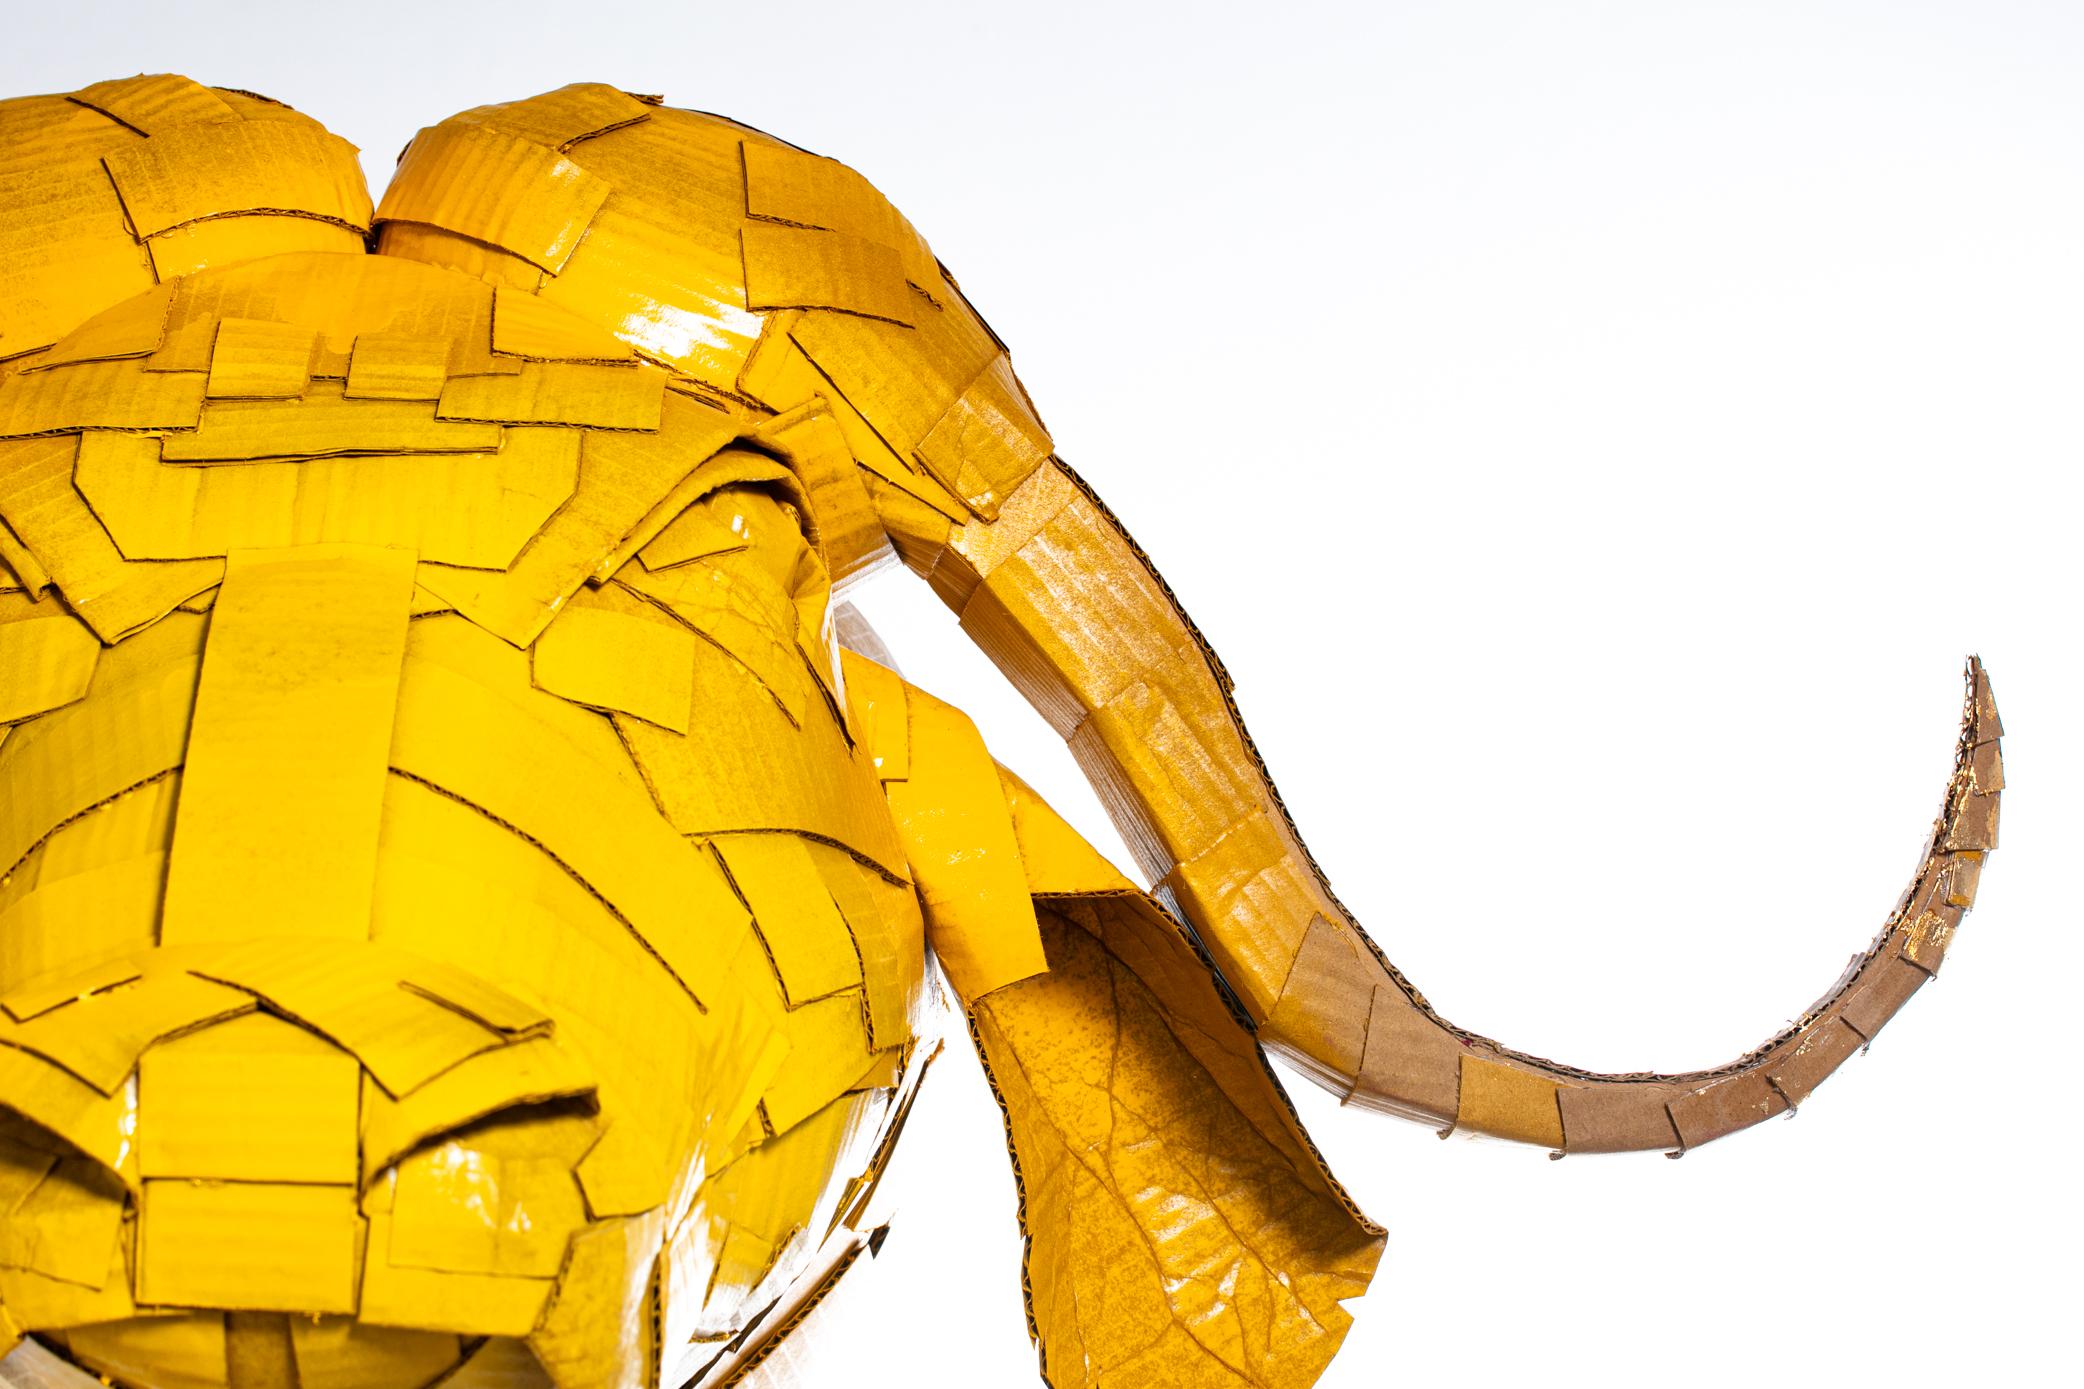 Buffalo #2 in Butterscotch Yellow with Gold Leaf Detail - Contemporary Art by Justin King